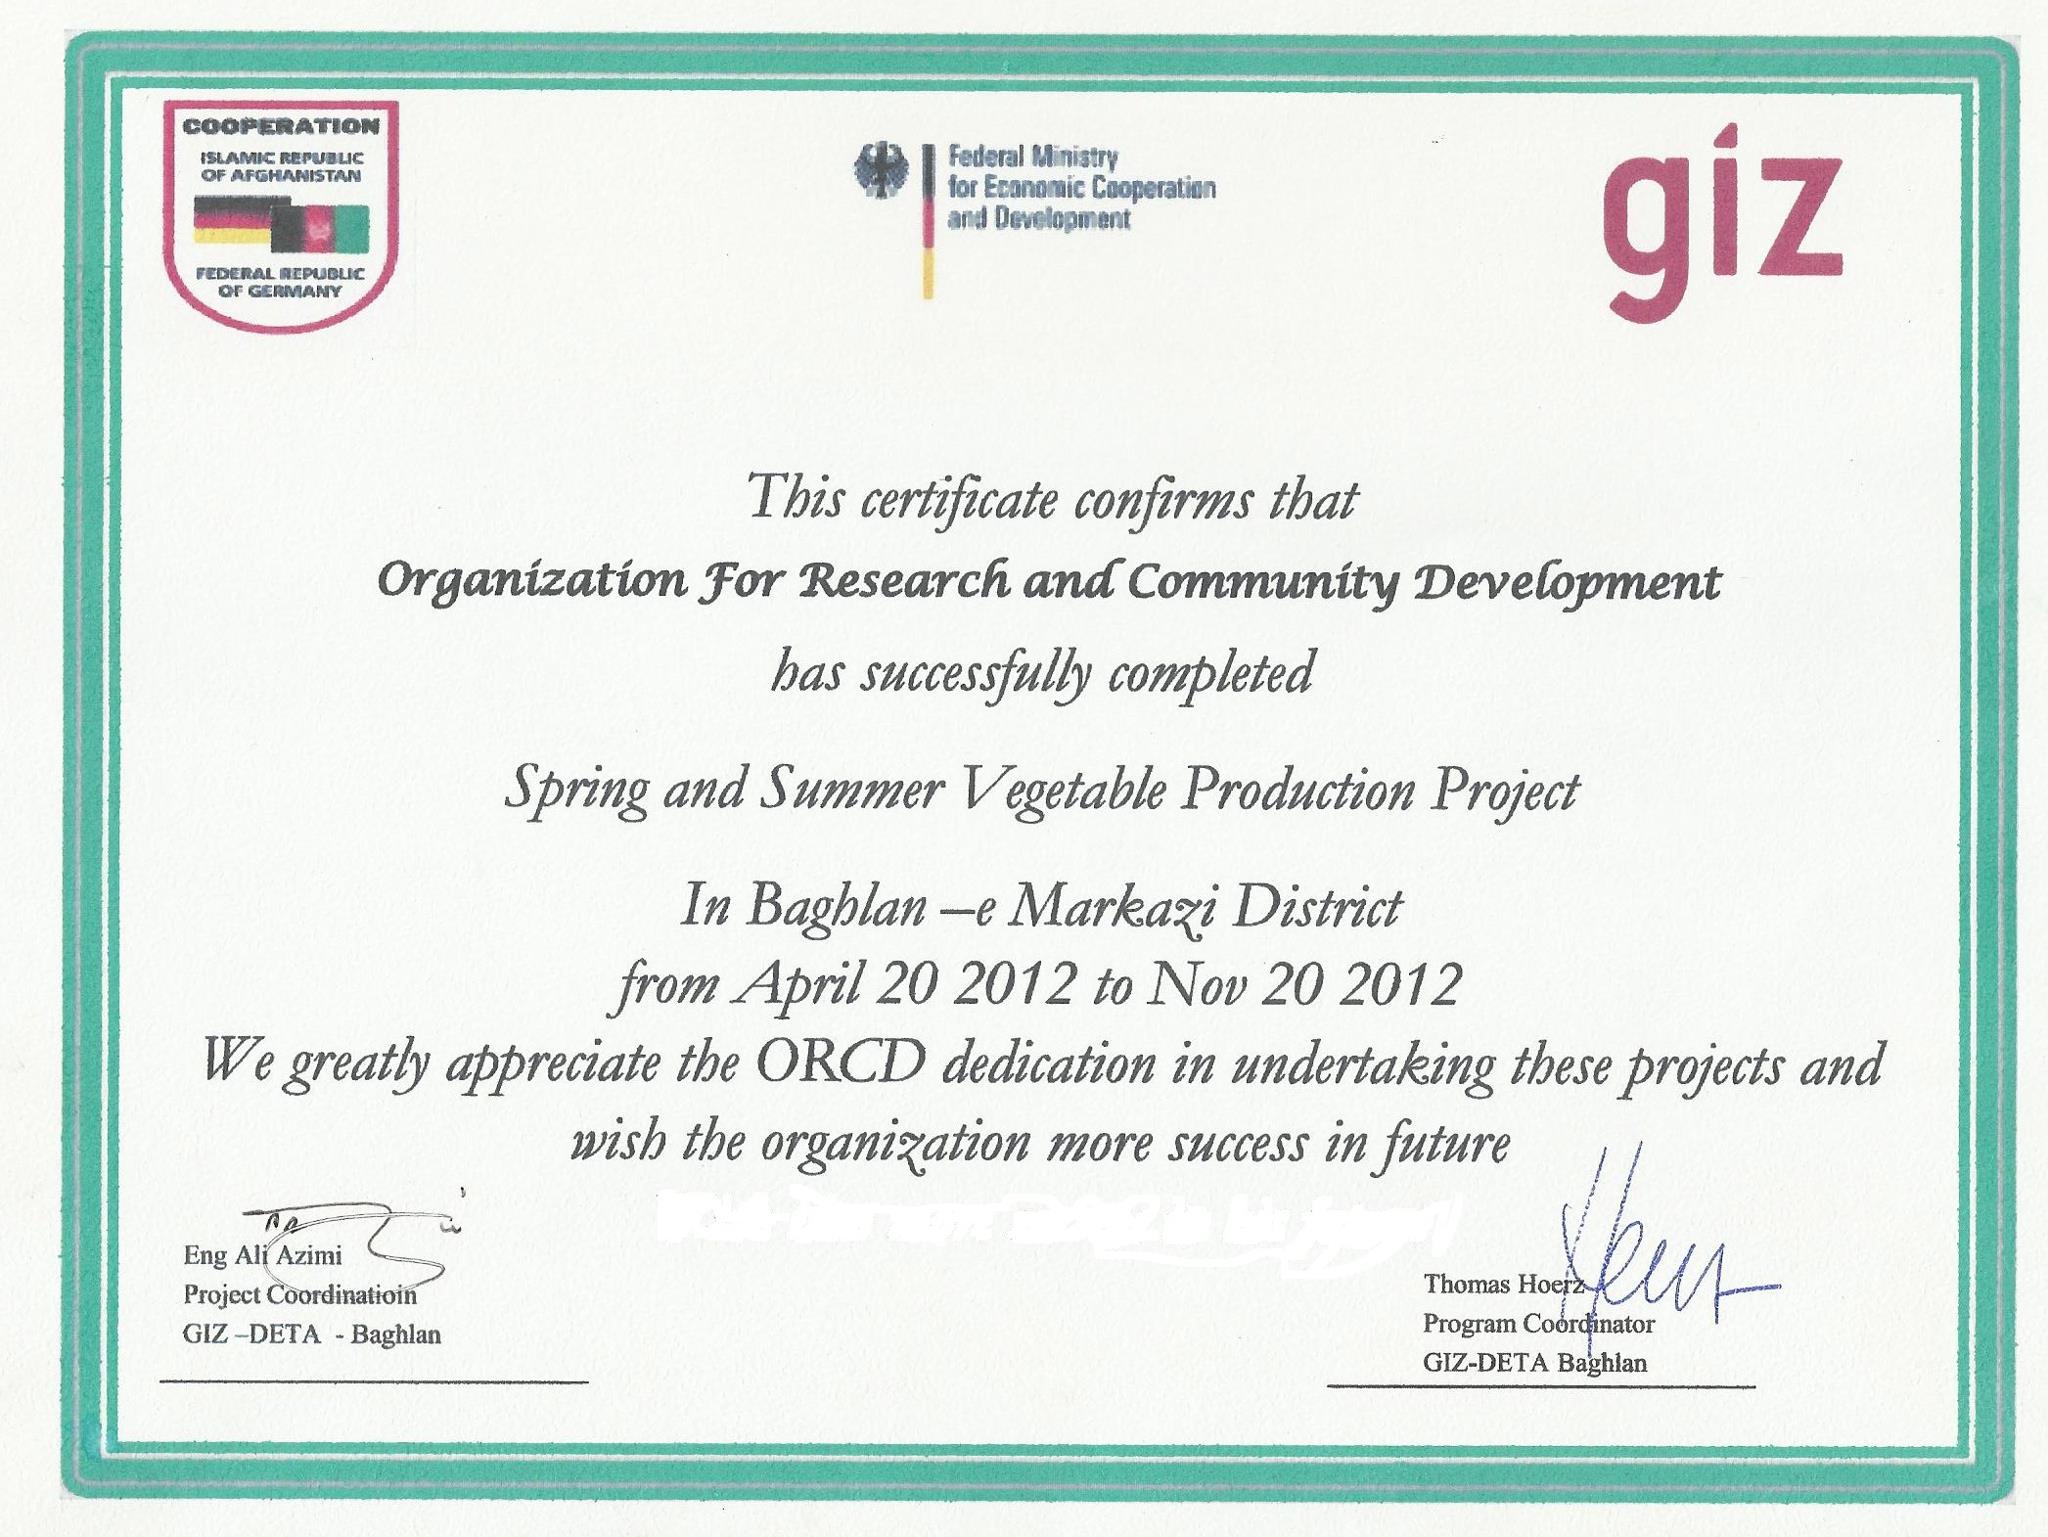 GIZ-DETA on behalf of Germany Federal Ministry for Economic Cooperation and Development awards certificate of recognition for the outstanding performance of ORCD in Baghlan for implementing a project in the Agriculture field